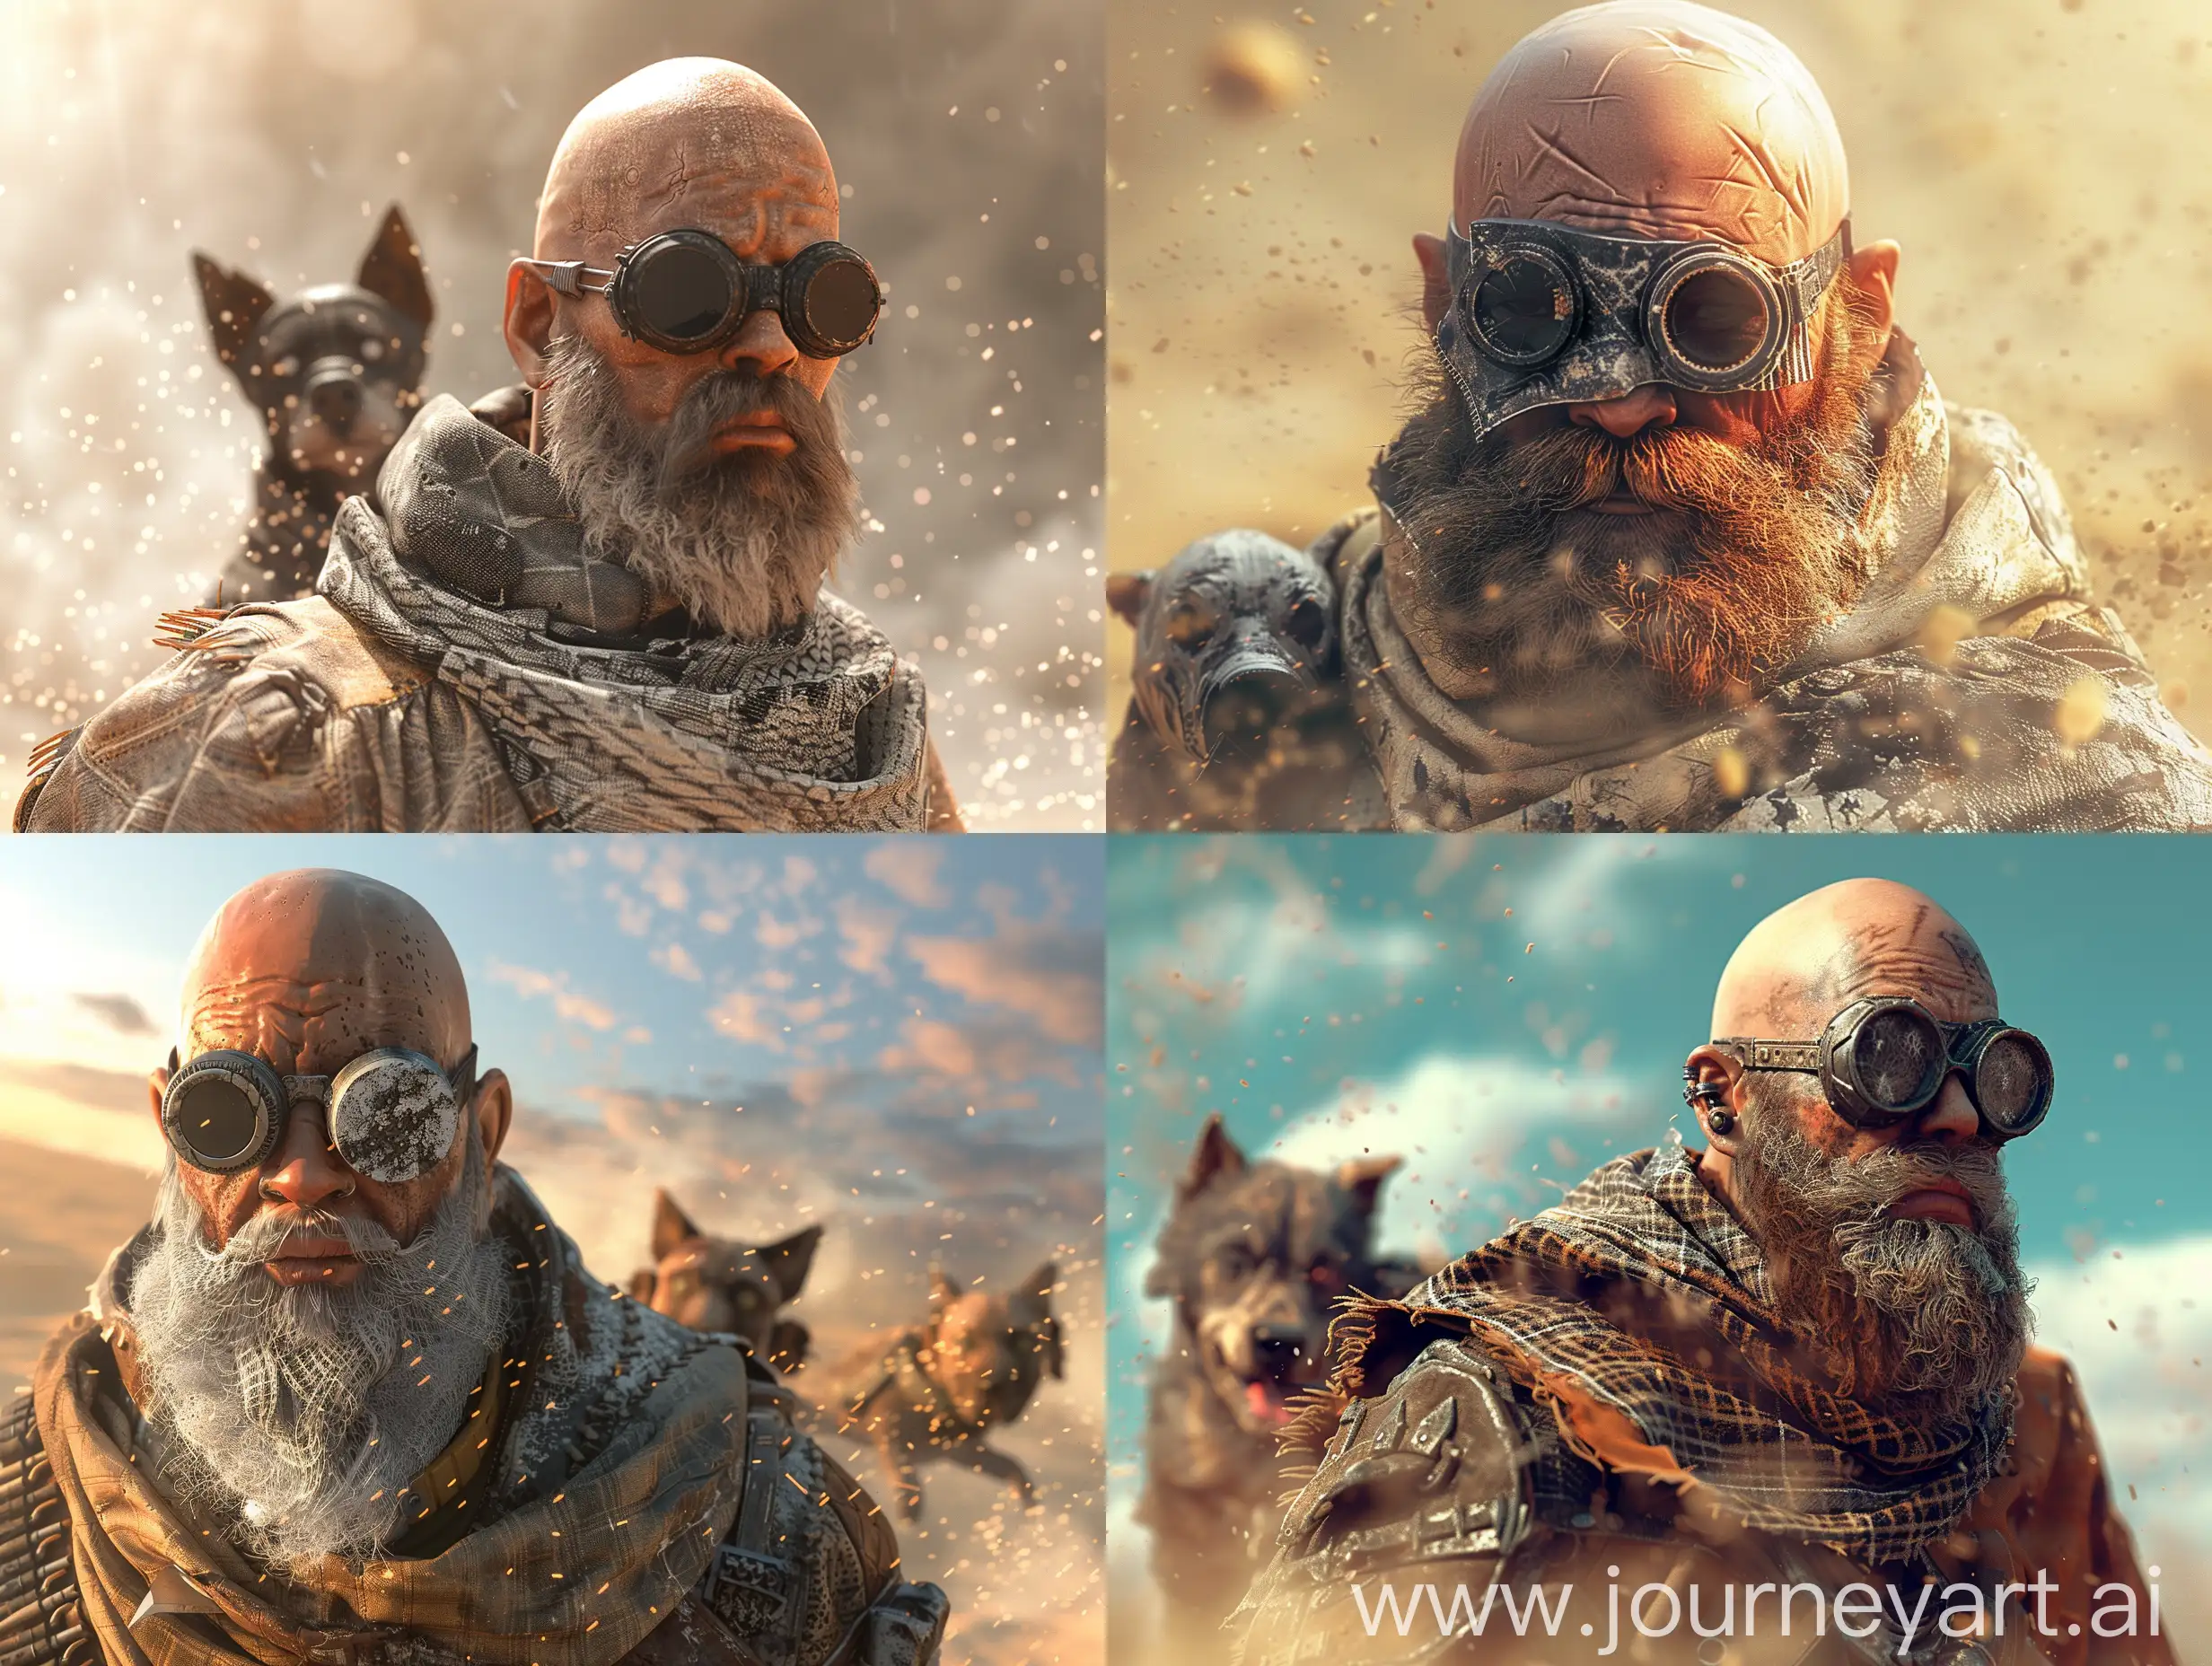 Apocalyptic-Wasteland-Warrior-Hyperstylized-3D-Render-in-Pixar-Anime-Style